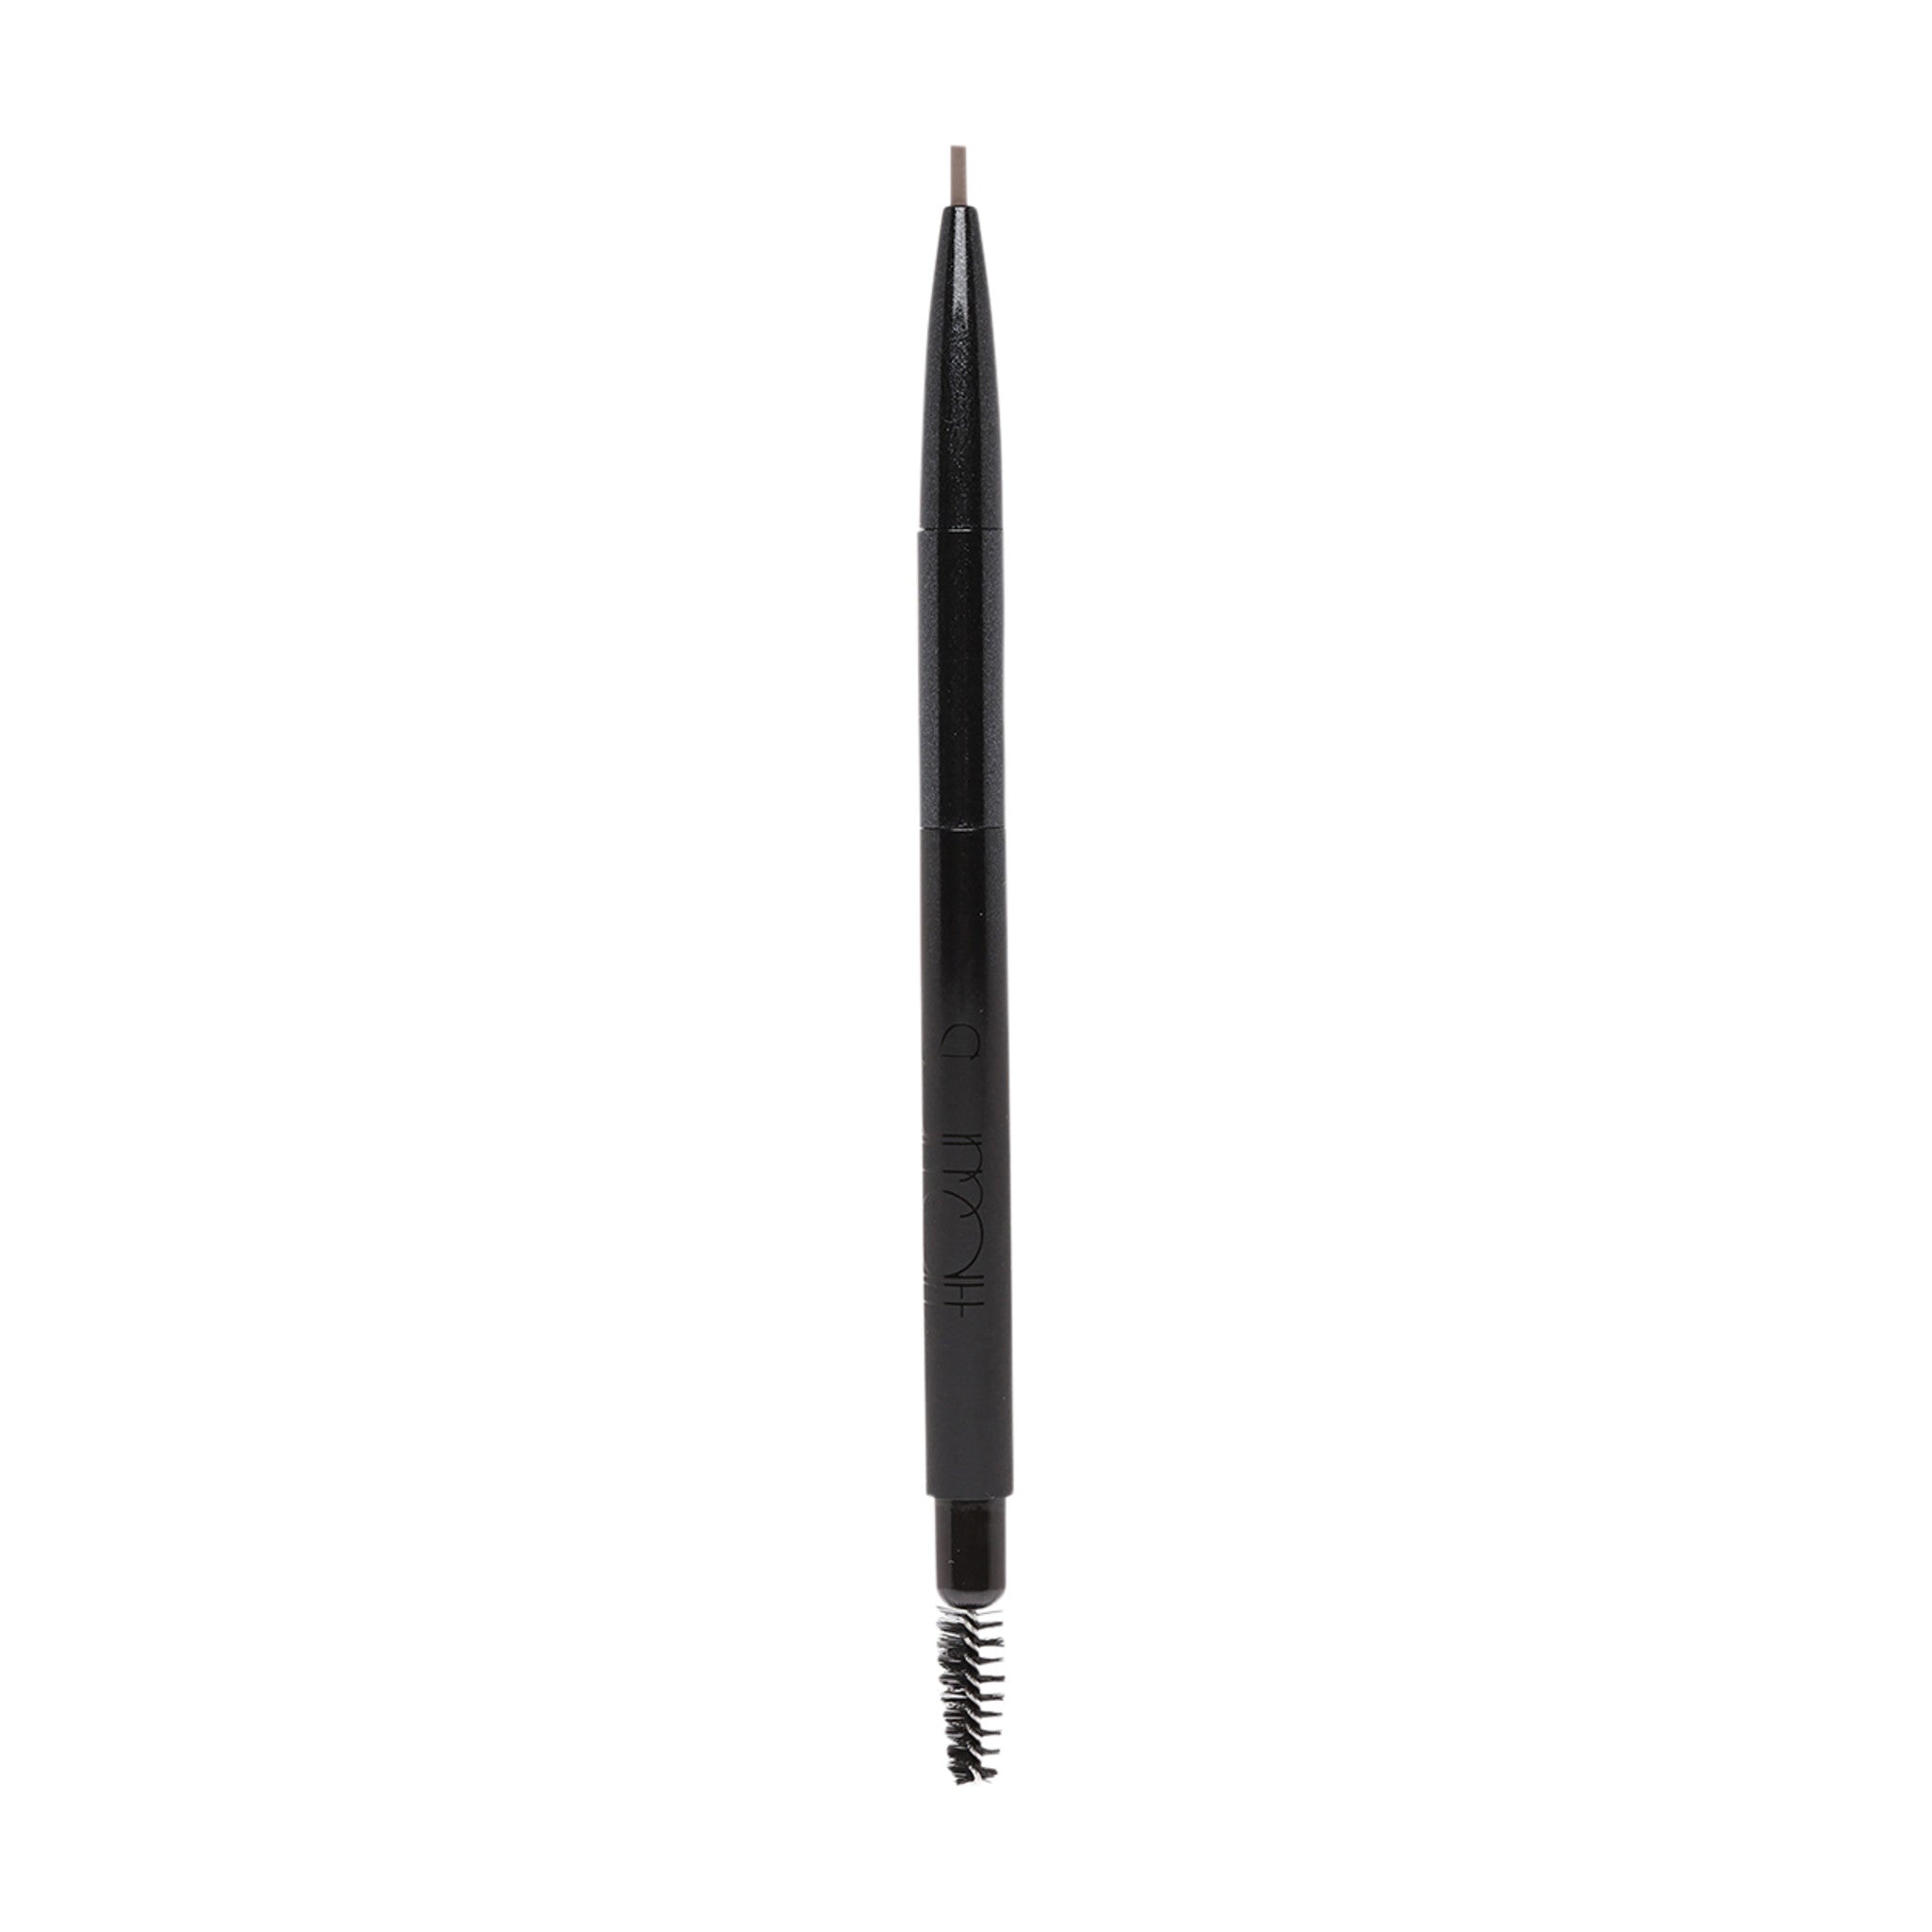 Expressioniste Brow Pencil Refill Cartridge main image.